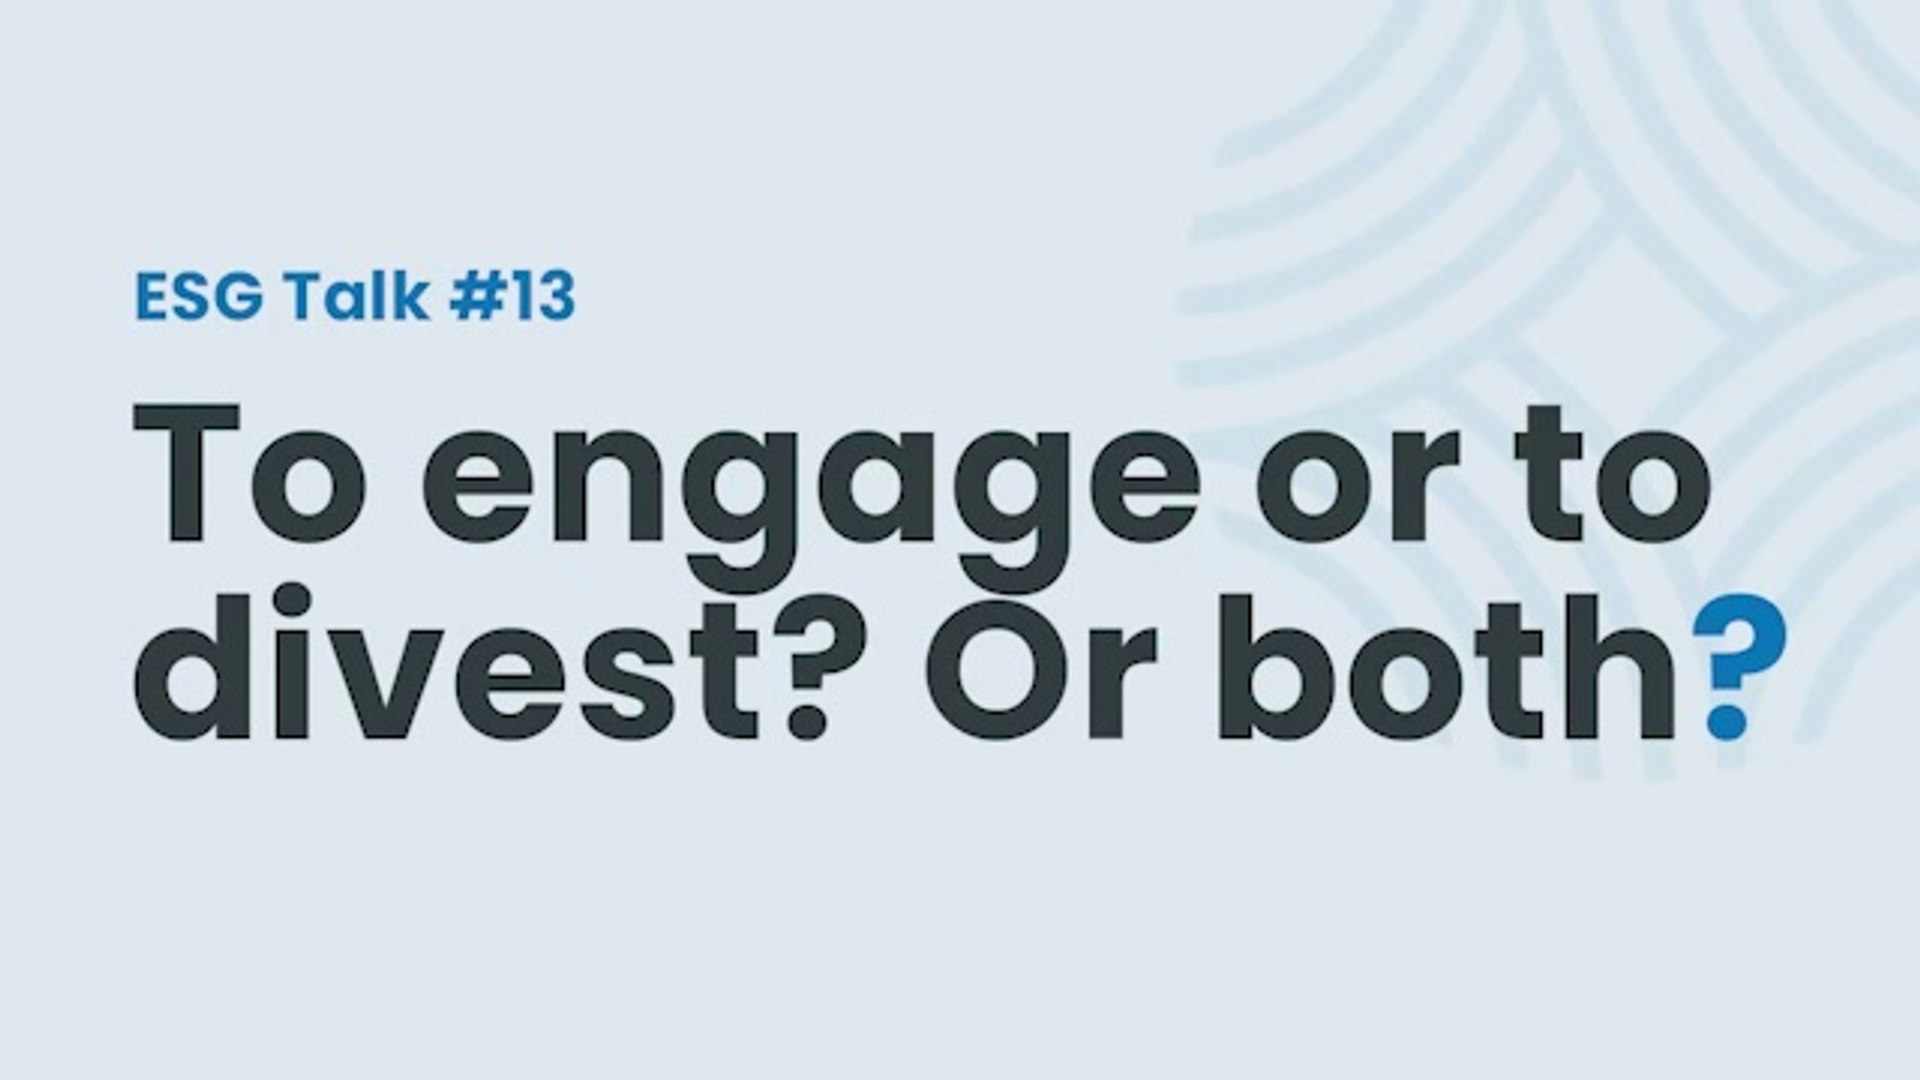 ESG Talks #13 - To engage or to divest? Or both?